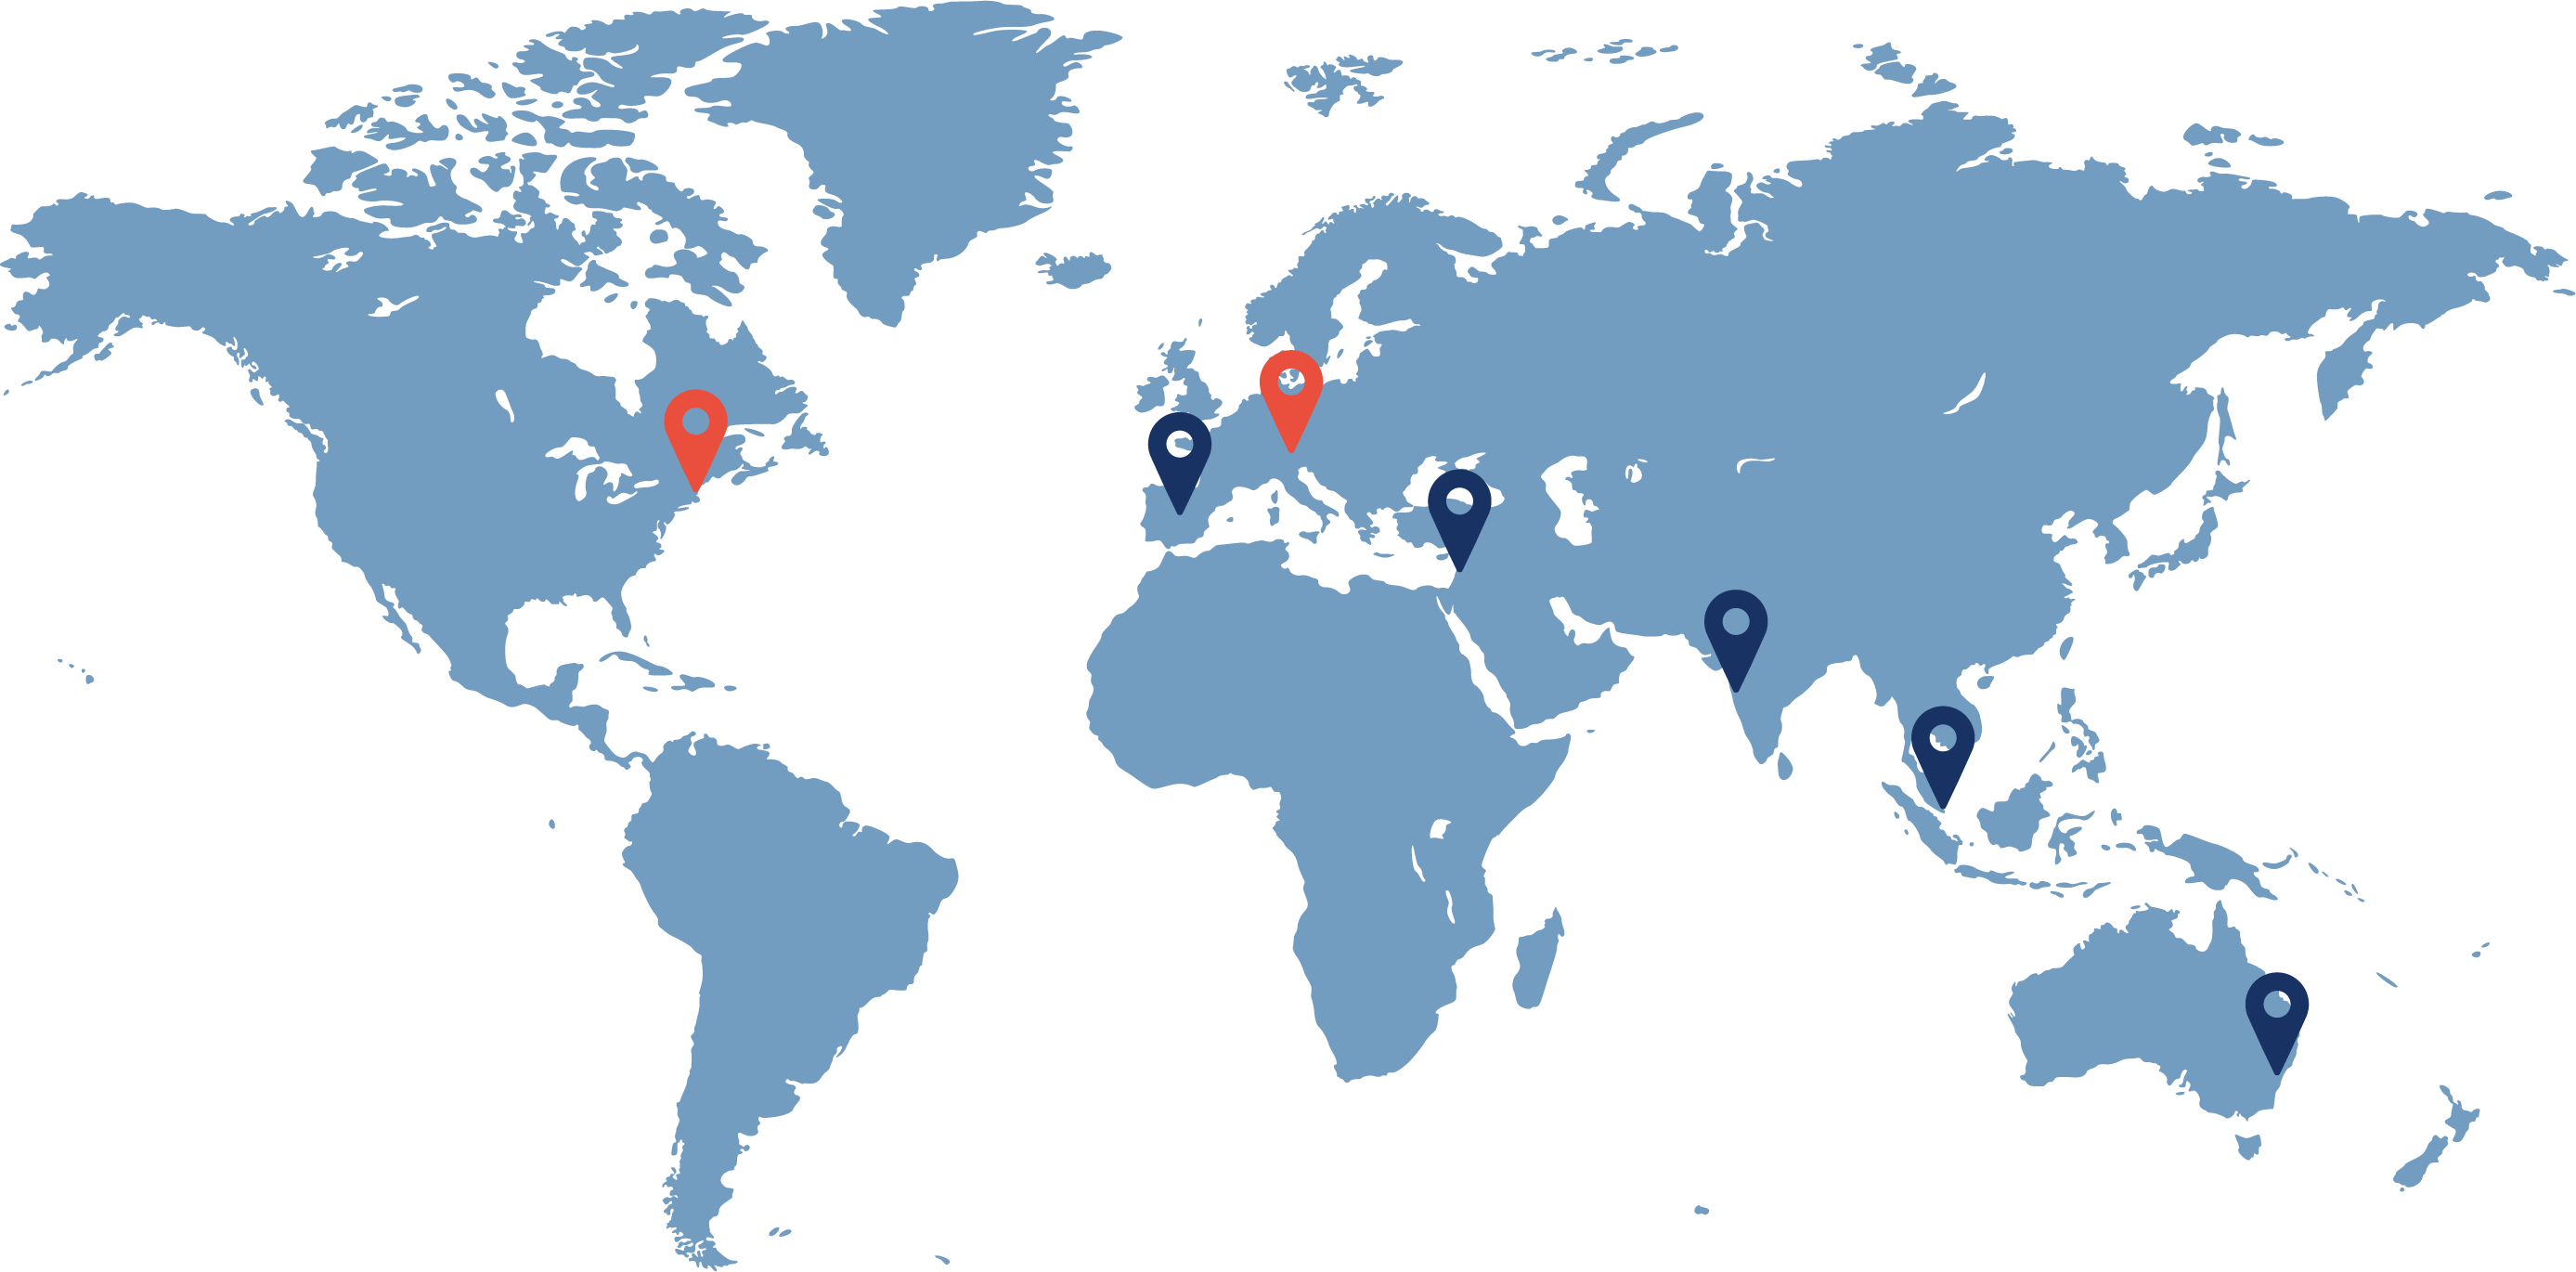 Infographic: world map with UpNano's representative offices indicated in the USA, Austria, Israel, China and Japan